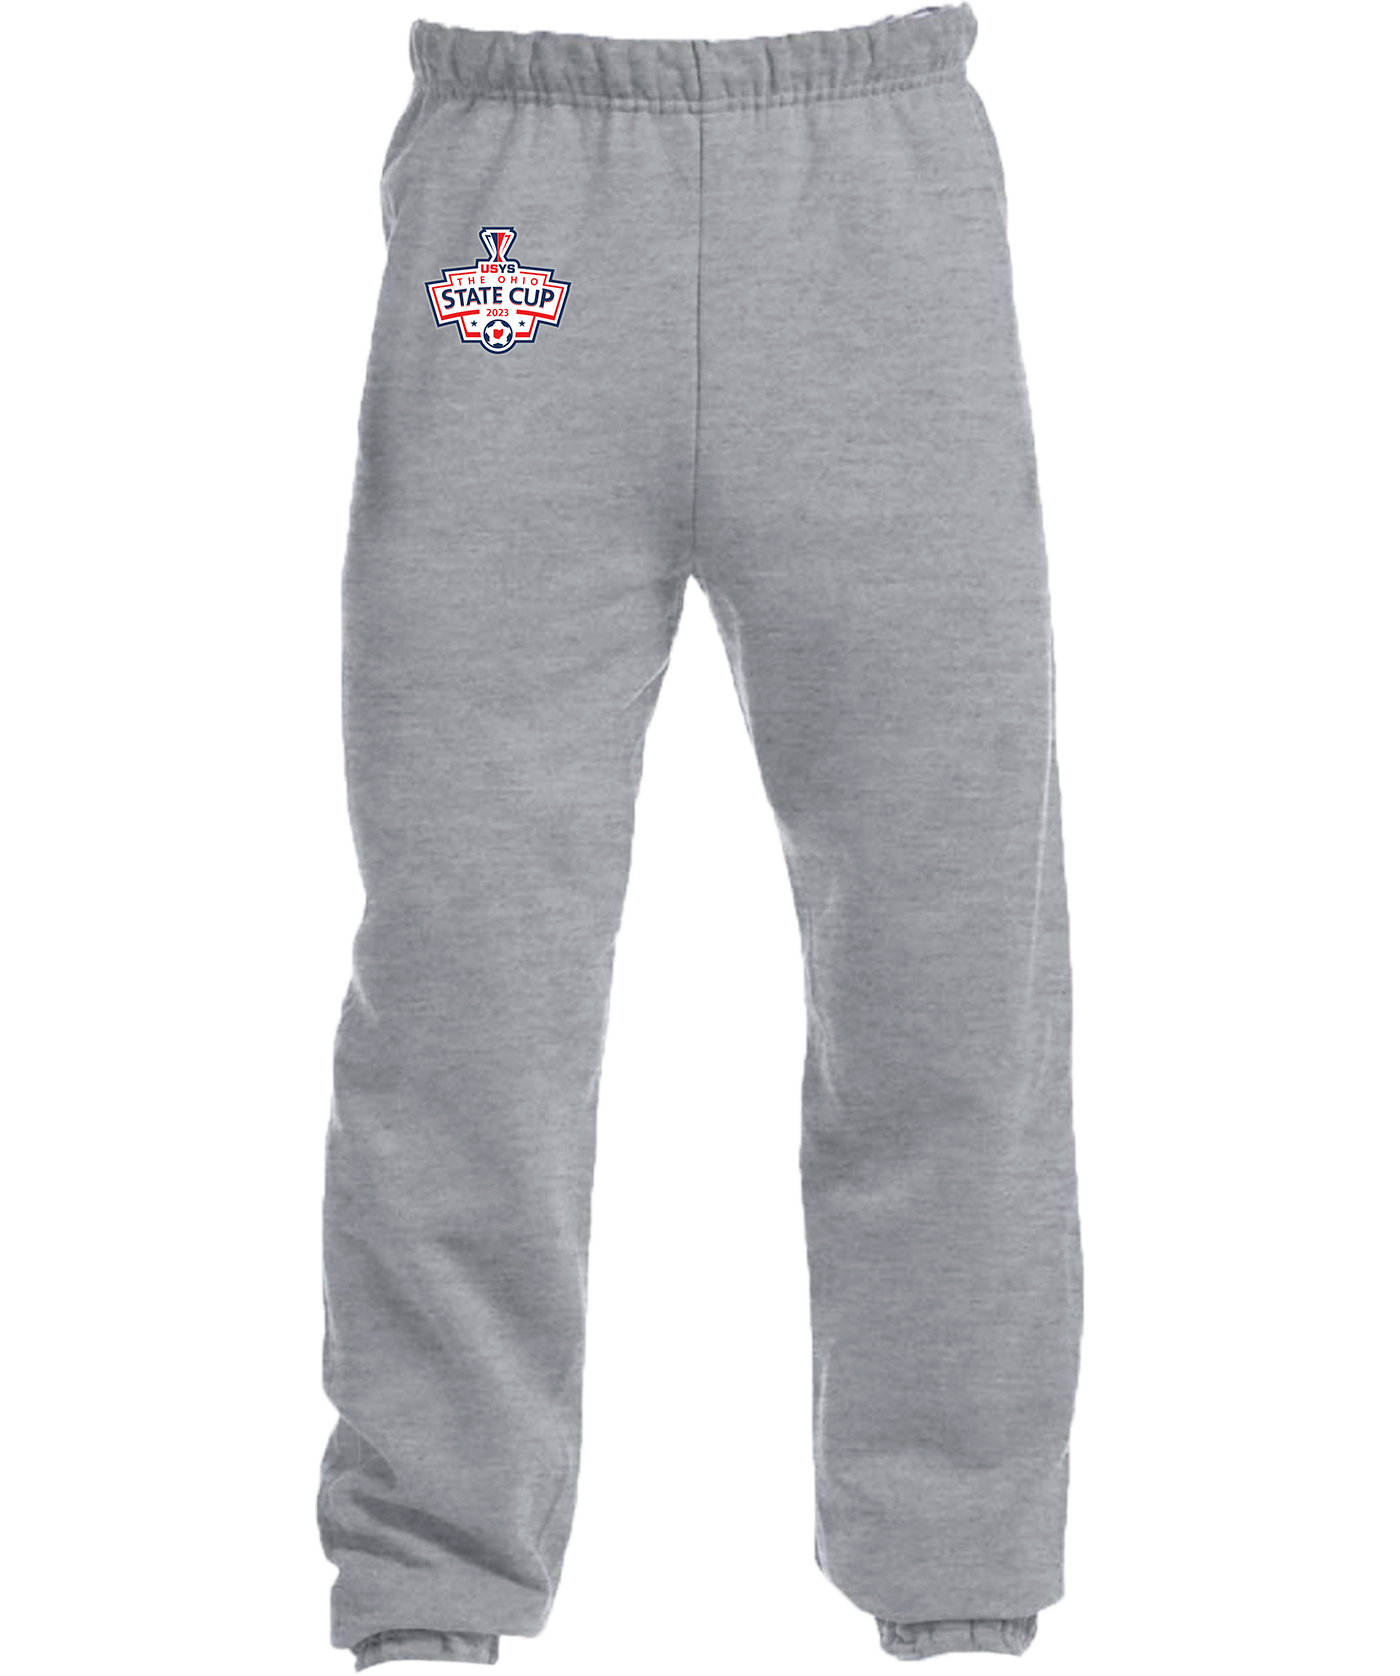 SWEAT PANTS - 2023 USYS The Ohio State Cup